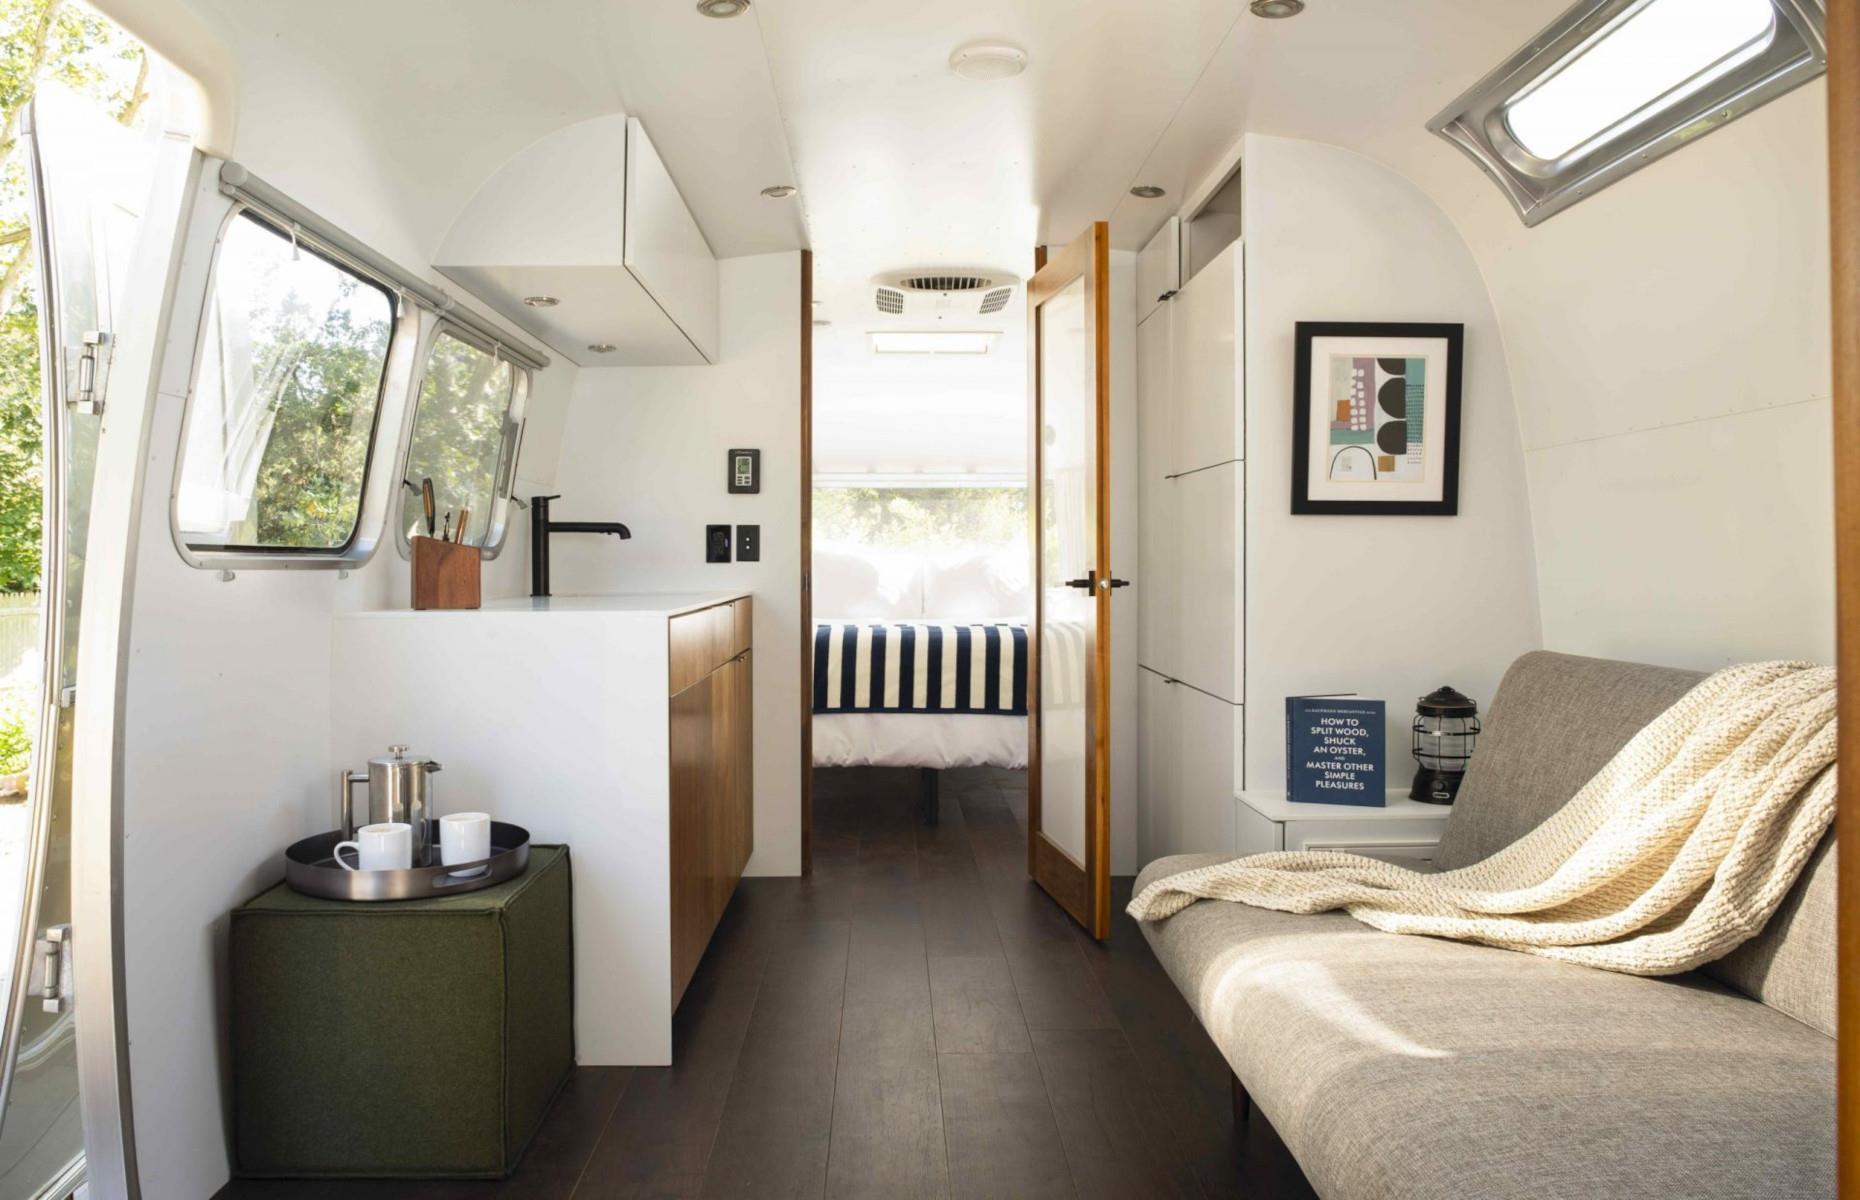 <p>The spacious 31-foot Airstream can sleep up to three adults, or two adults and two children.</p>  <p>The interior is bright and airy, with a neutral white colour scheme and pared-back furnishings. Outside, the outdoor patio includes a firepit and a dining area. </p>